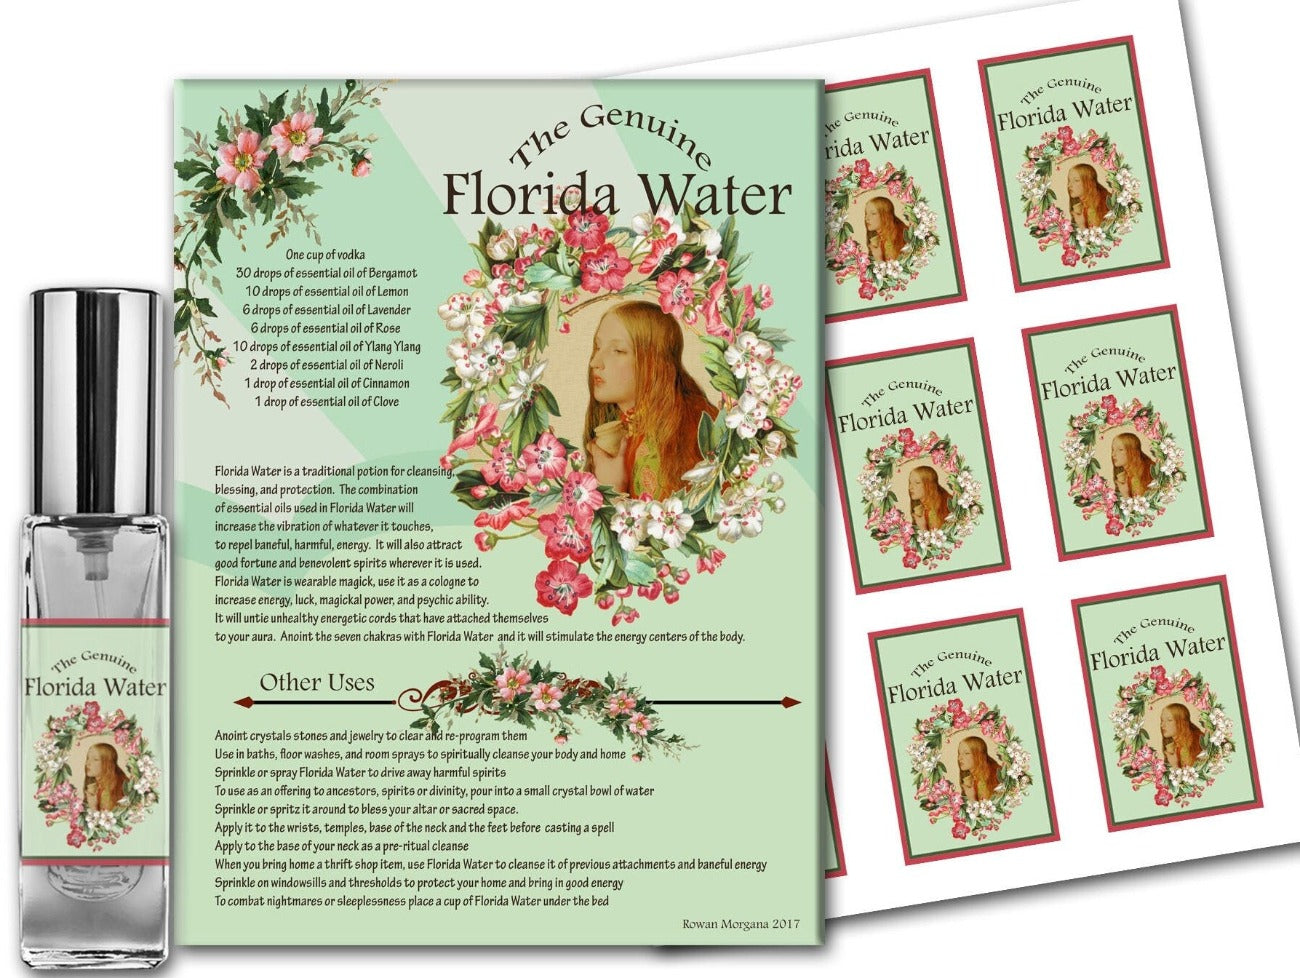 FLORIDA WATER COLOGNE, Toilette Water, Spiritual Cleansing, Blessing, Good Luck & Protection, Original 19th Century Recipe with Bonus Labels - Morgana Magick Spell